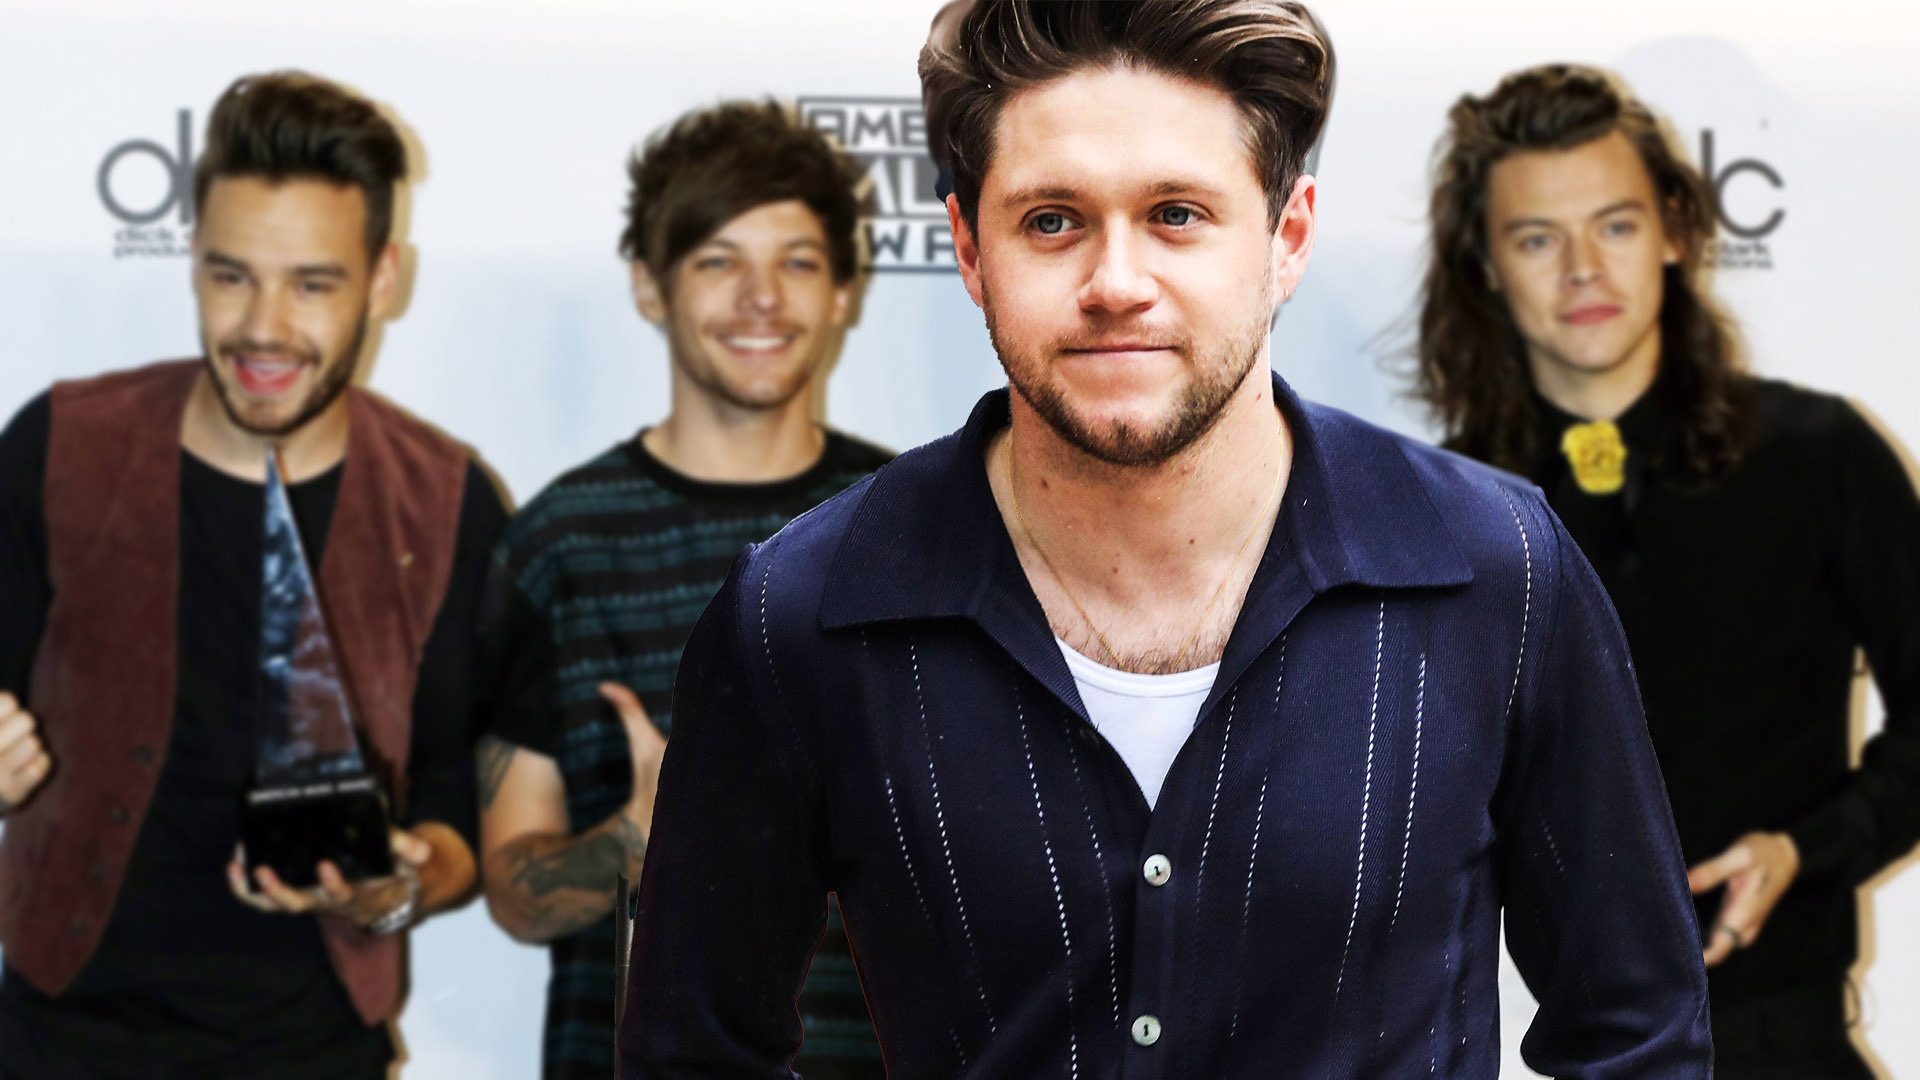 Niall Horan Adds Fuel to the Fire of One Direction Reunion Rumors